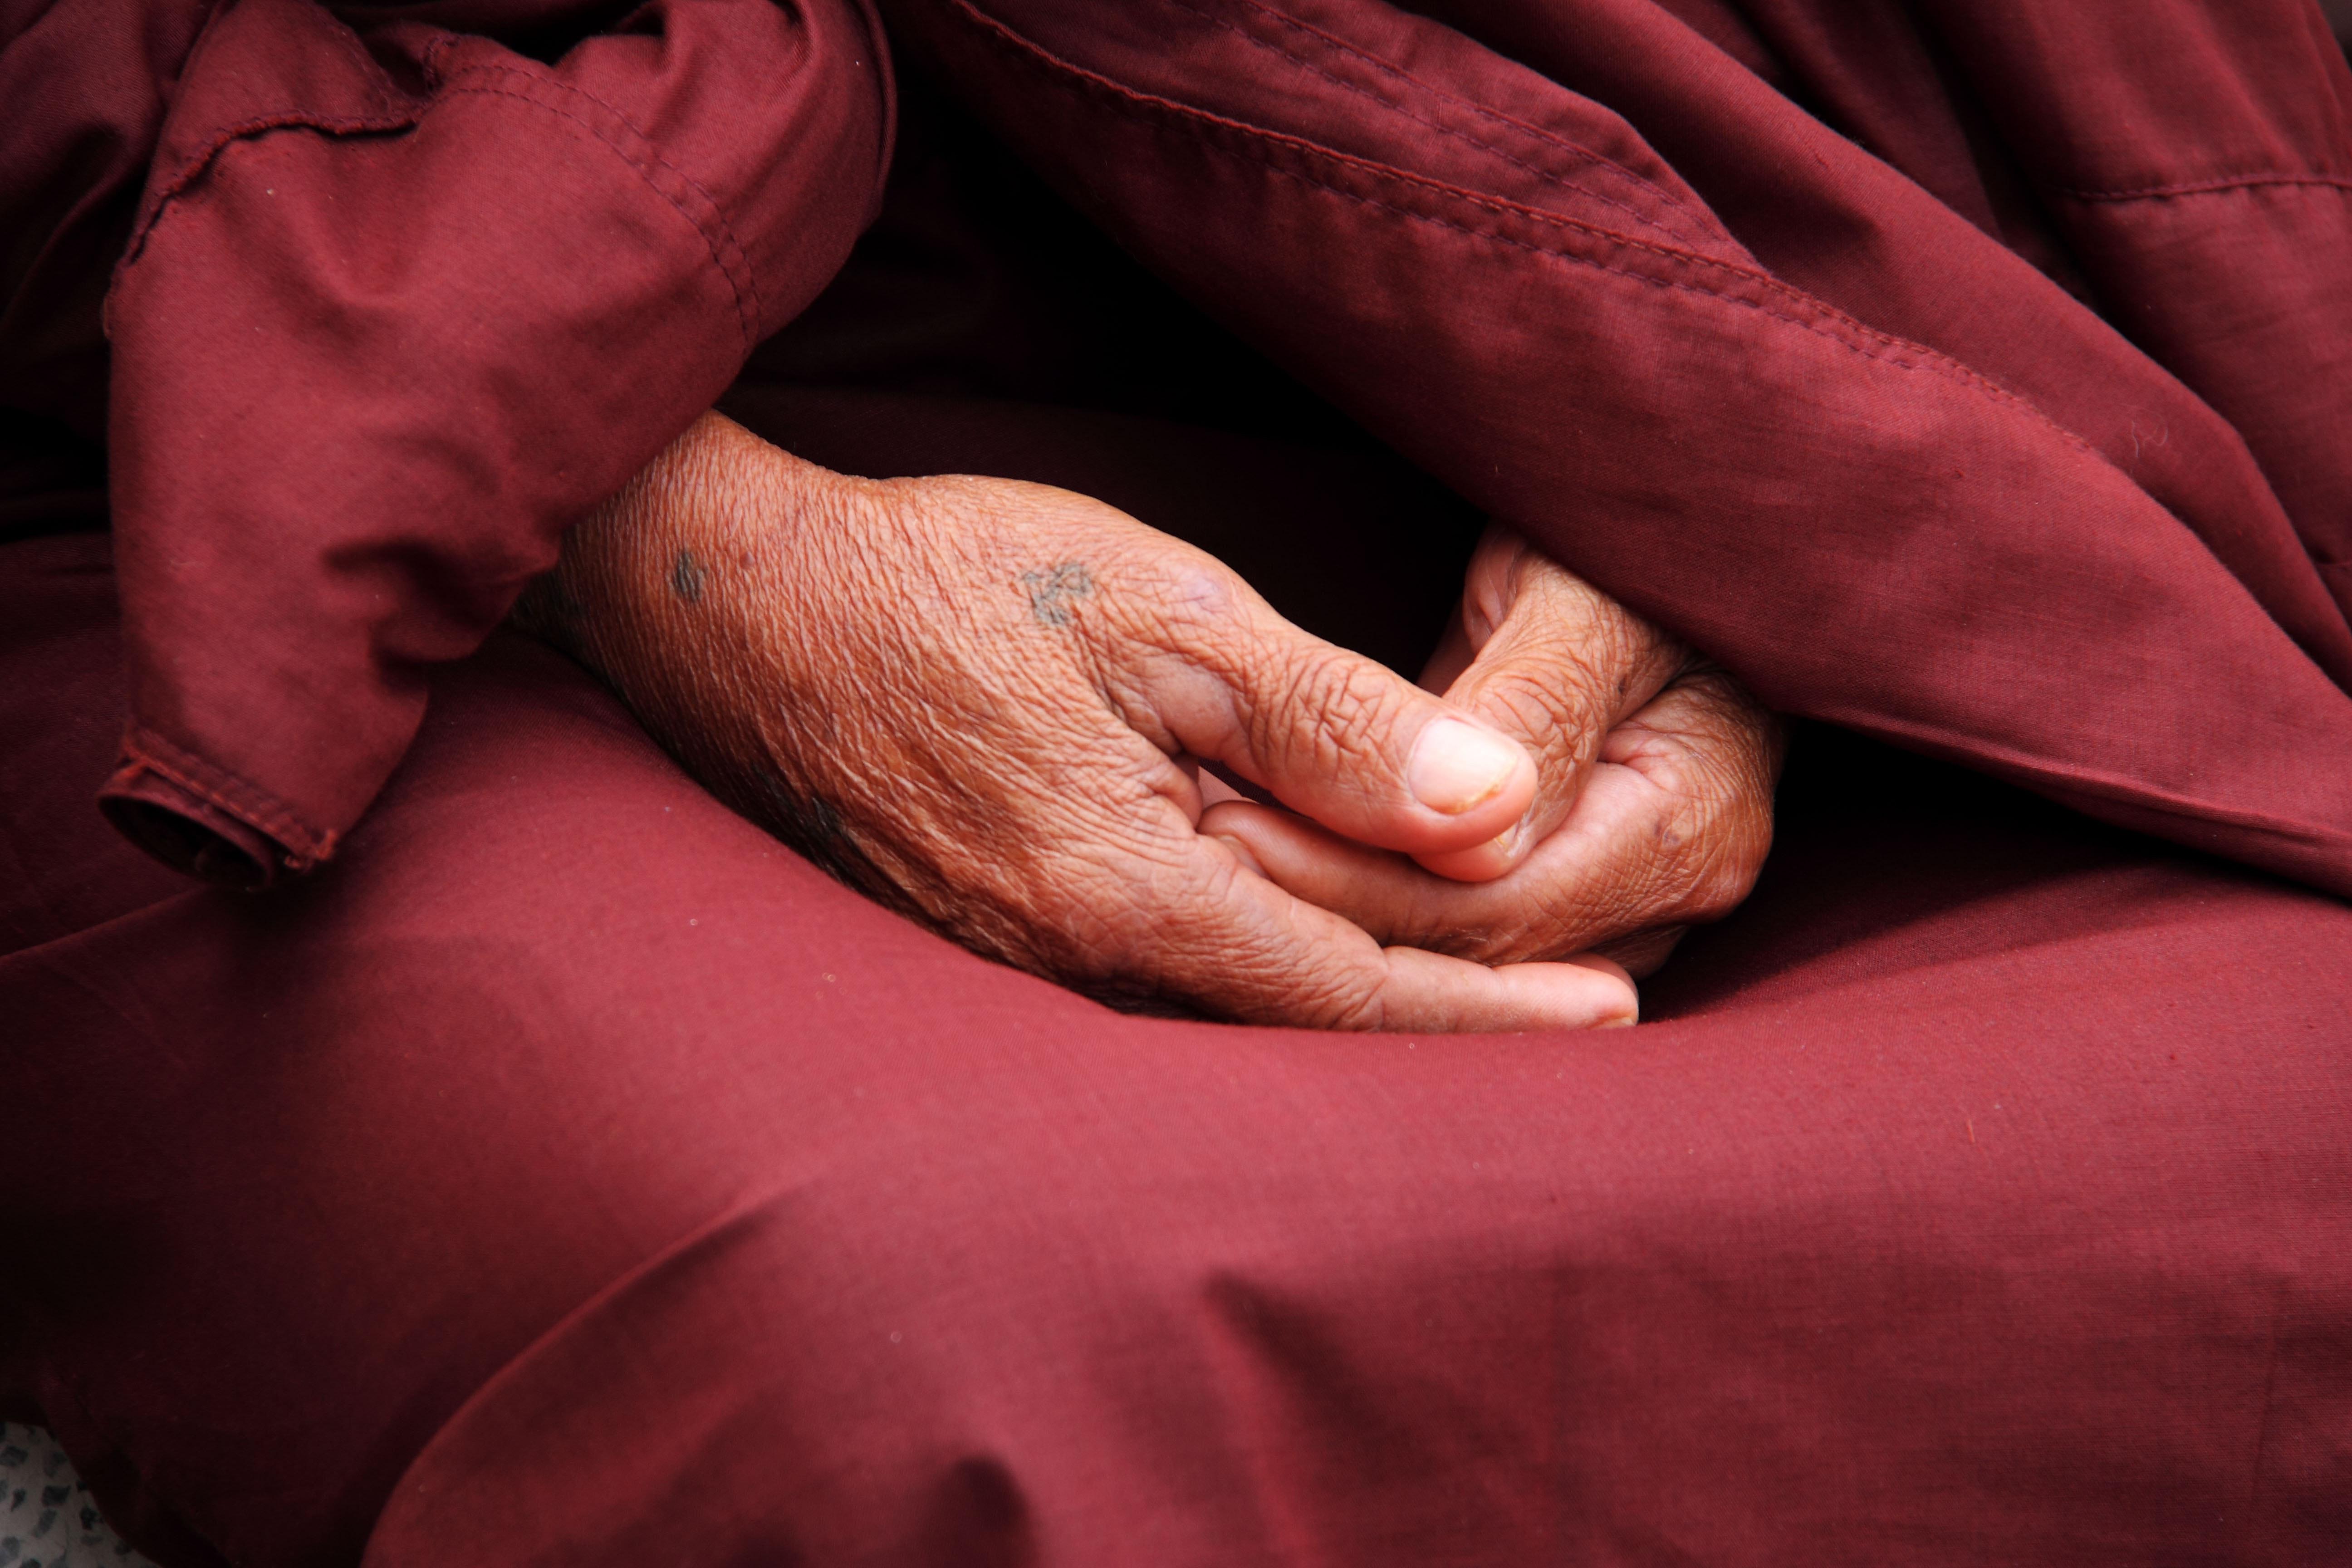 Monks hands in their lap with a marron robe